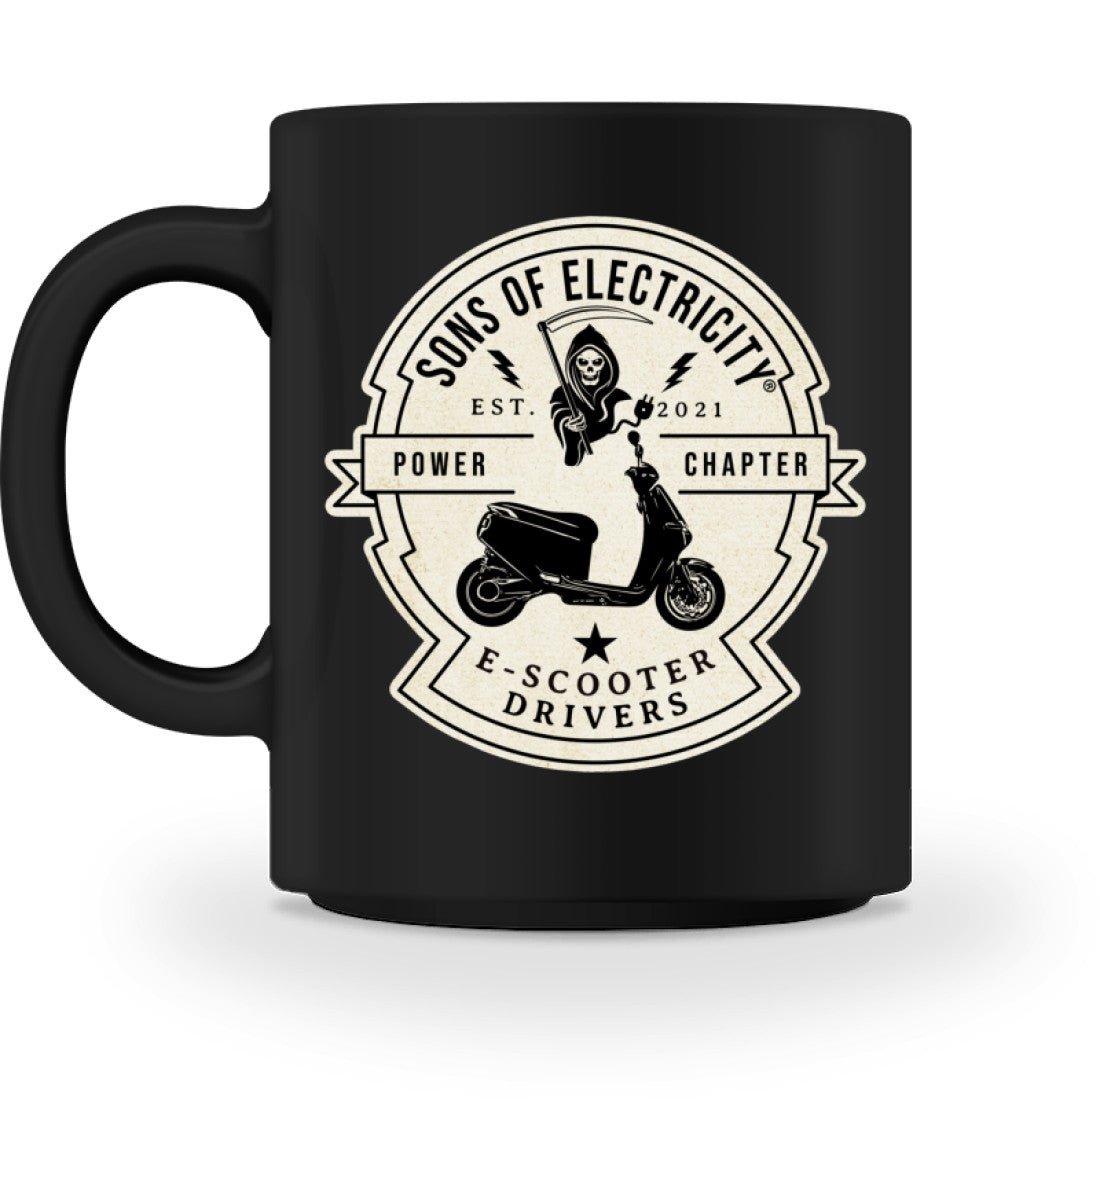 E-Motorroller Tasse: SONS OF ELECTRICITY- E-Scooter Drivers